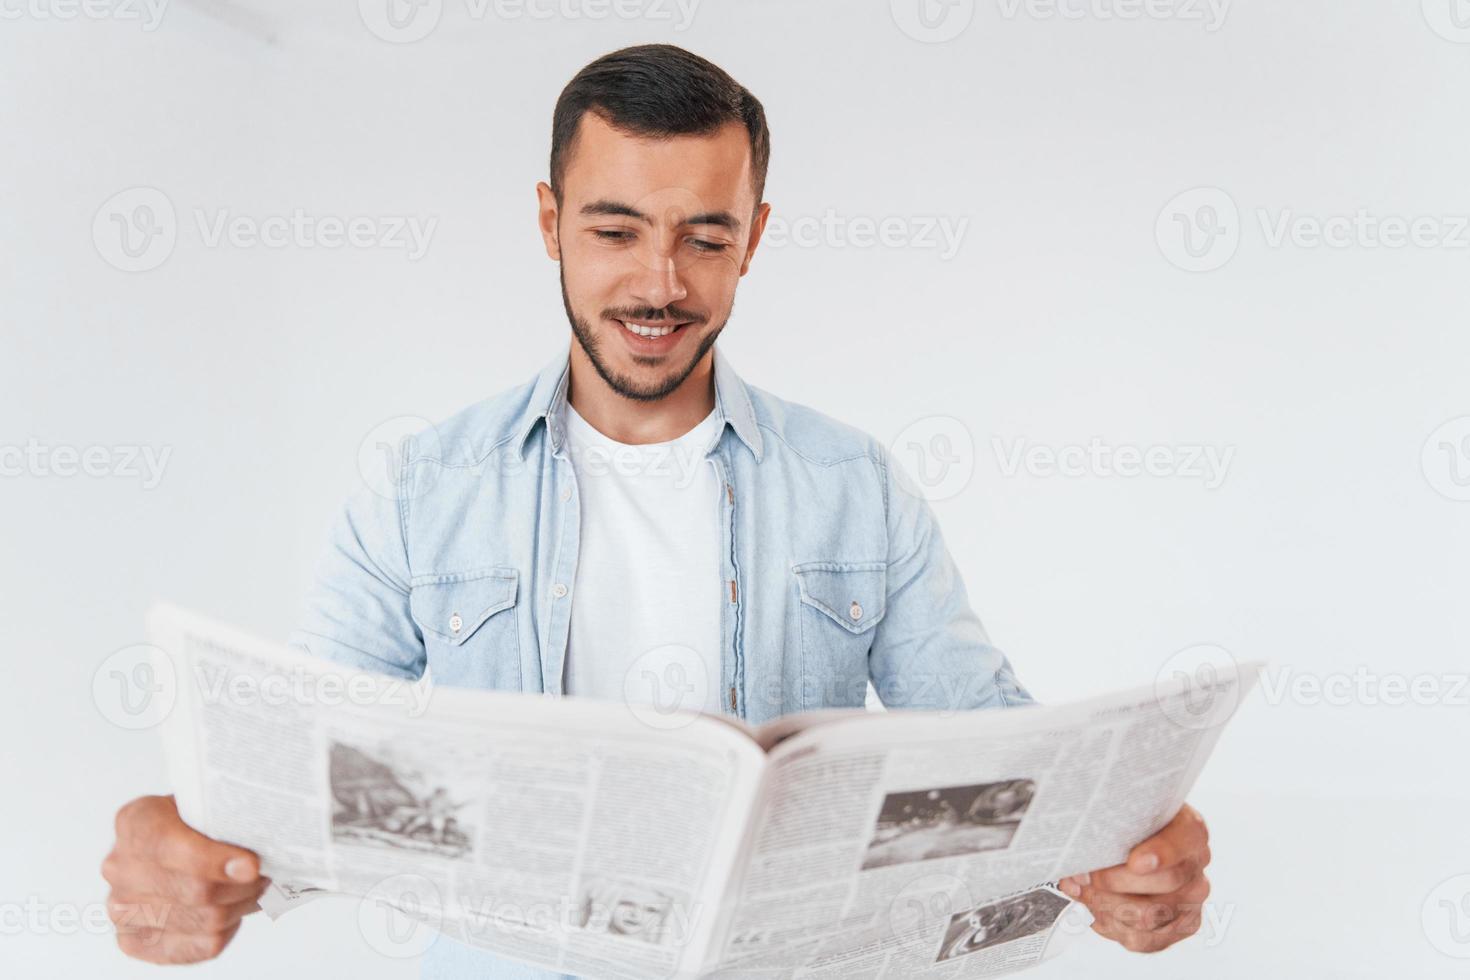 Reads newspaper. Young handsome man standing indoors against white background photo